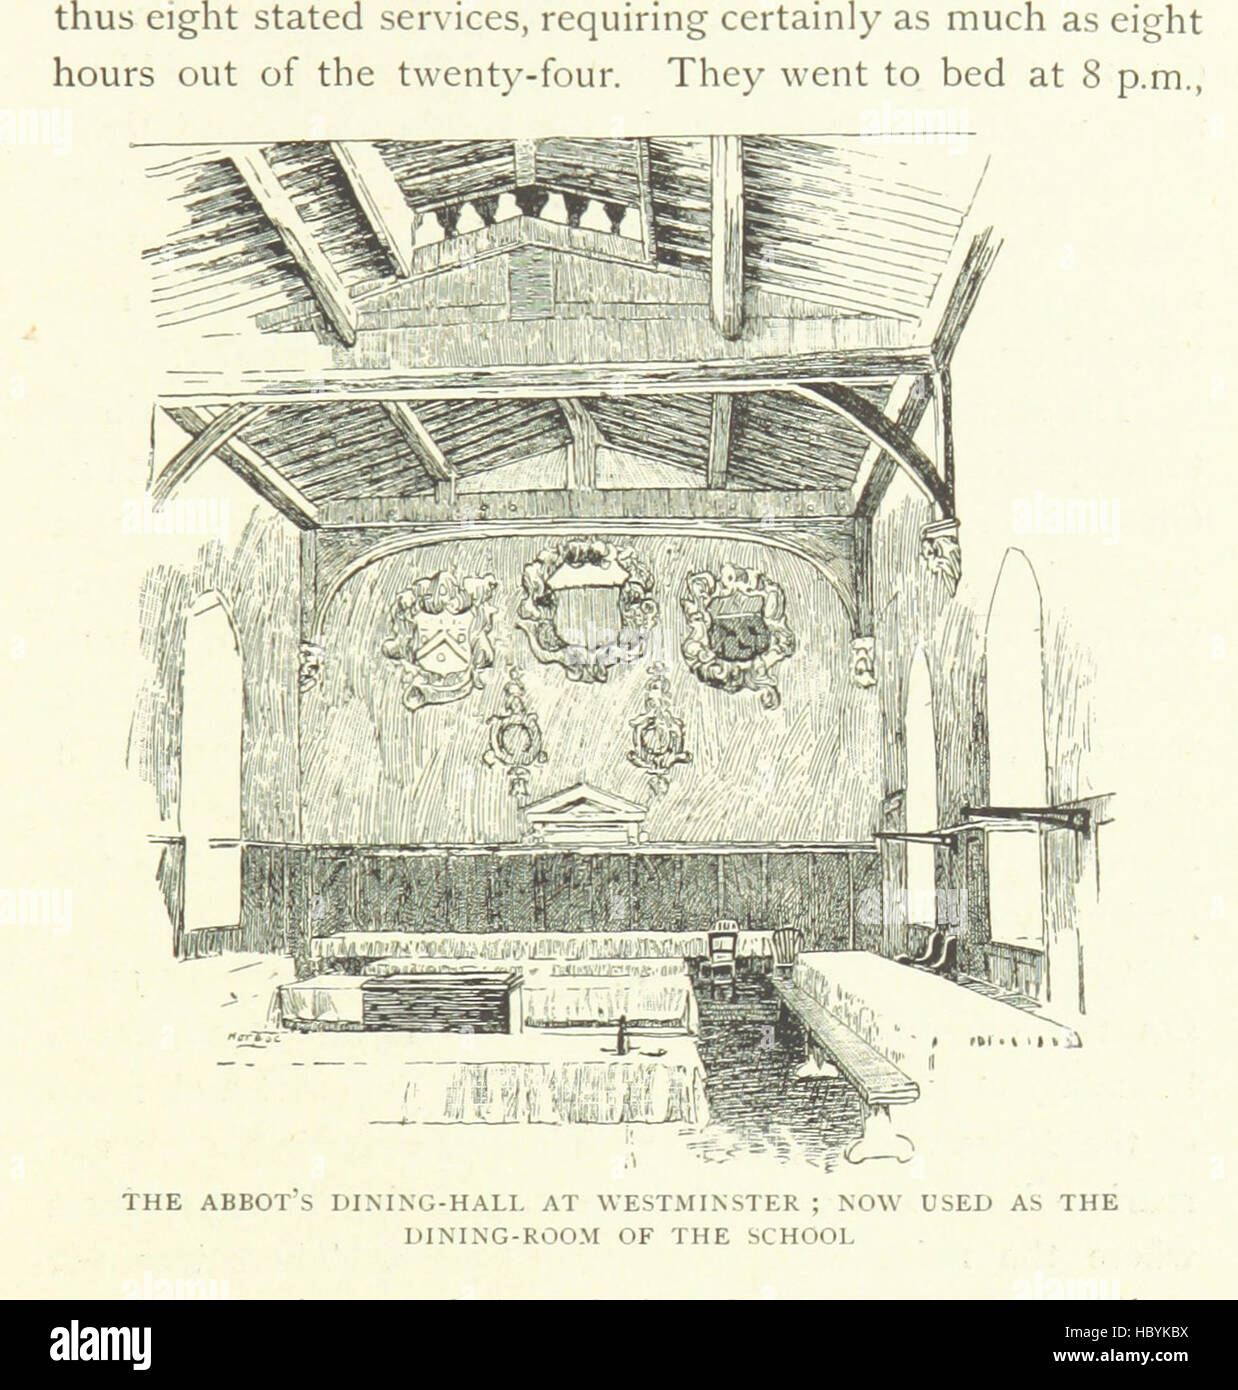 Image taken from page 109 of 'Westminster ... With ... illustrations' Image taken from page 109 of 'Westminster  With Stock Photo